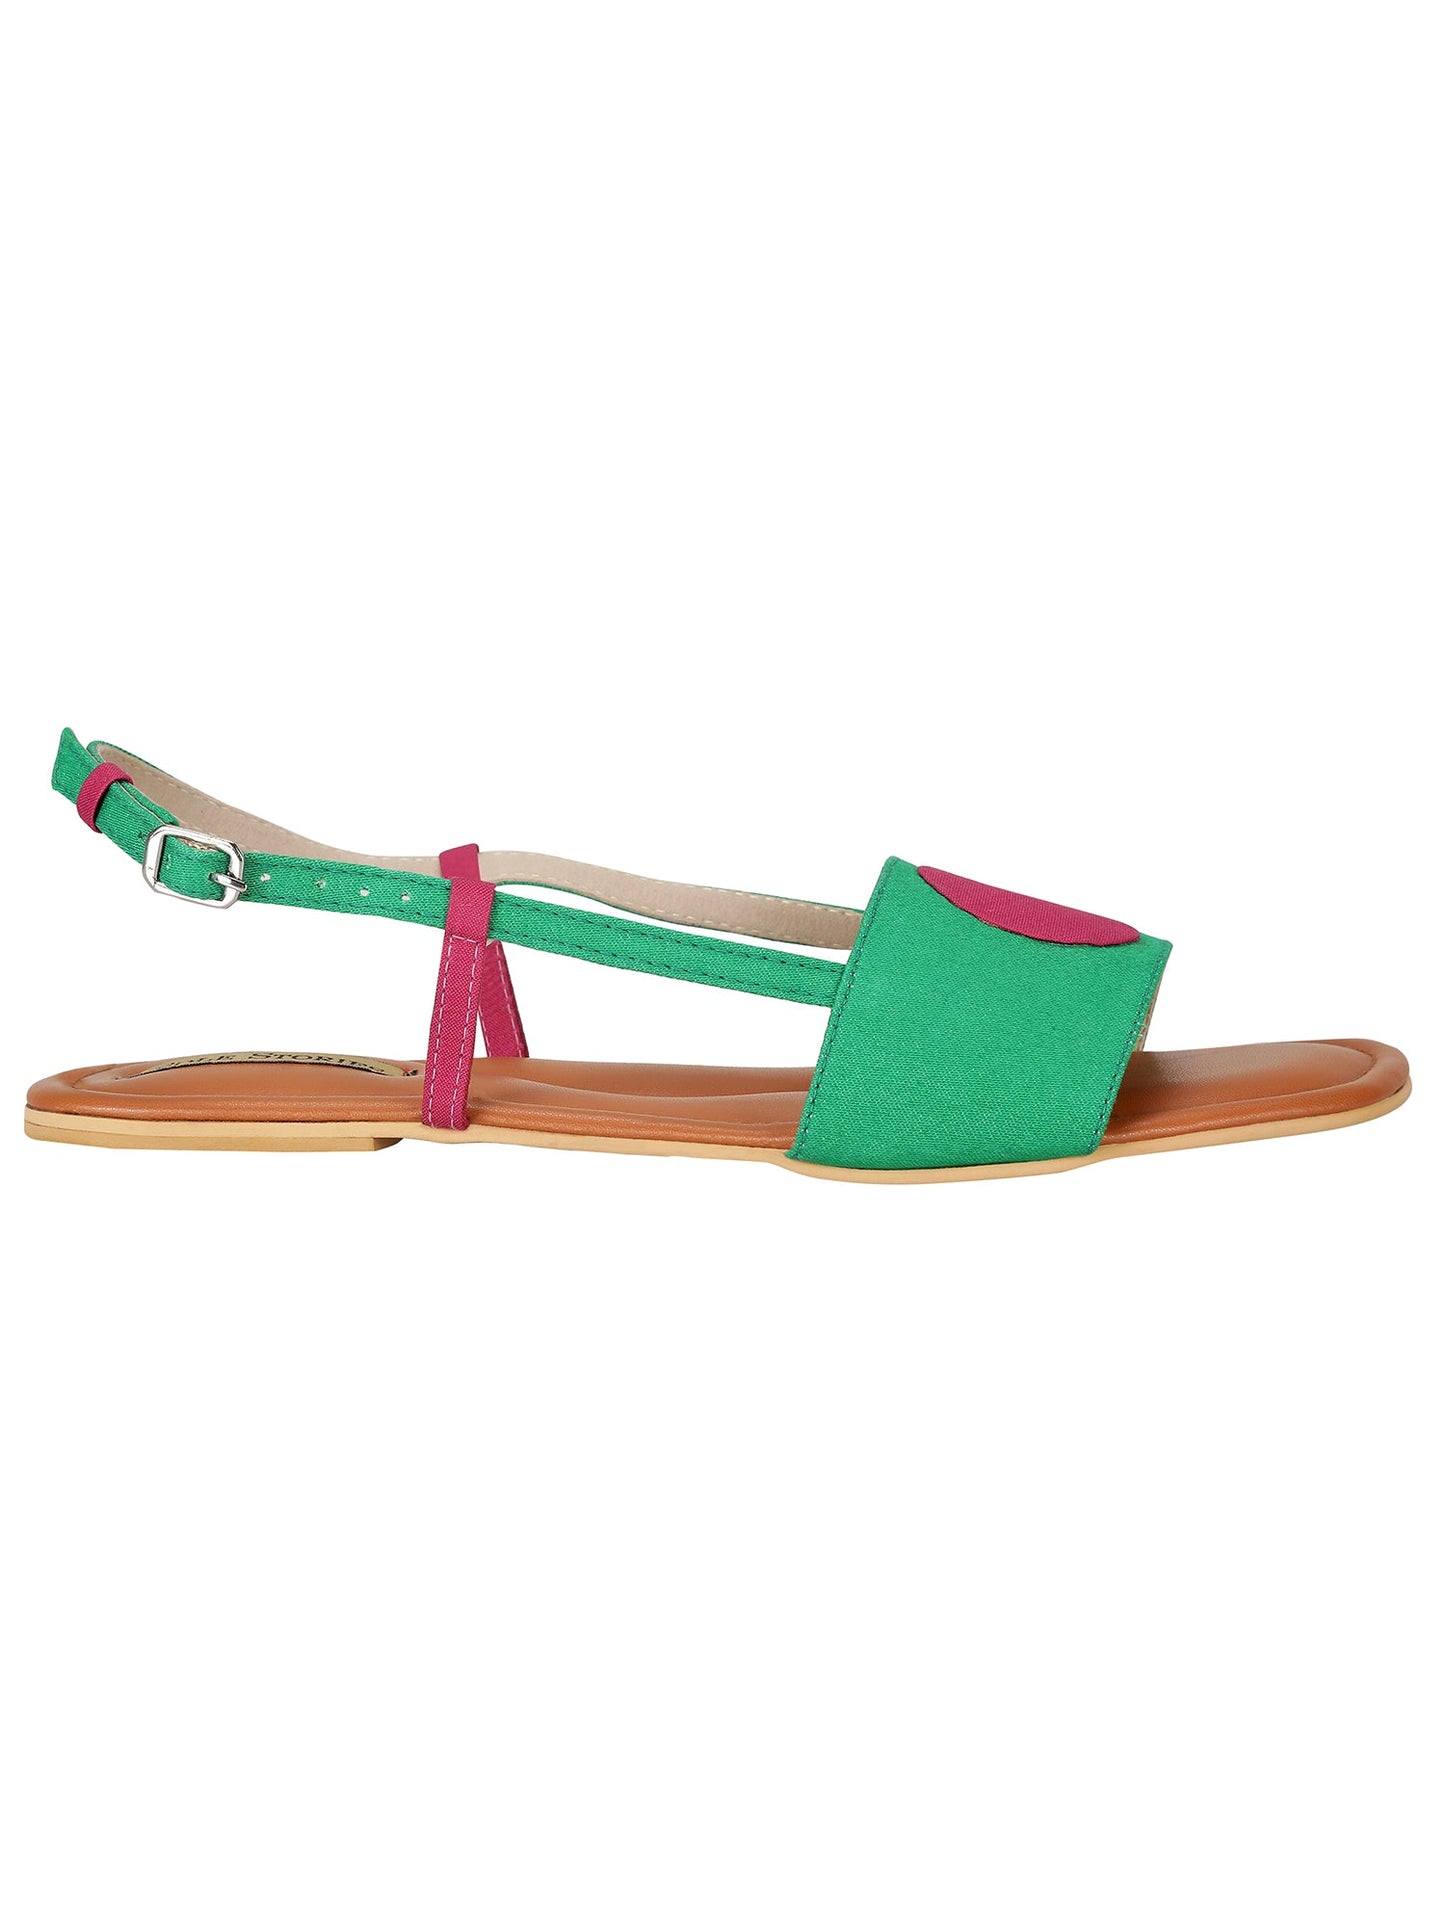 Bindi Backstraps in Green and Pink by Sole Stories with Basics Edit- Chapter II, Faux Leather, Flats, Green, Handcrafted, Pink, Relaxed Fit, Solids, Vegan at Kamakhyaa for sustainable fashion